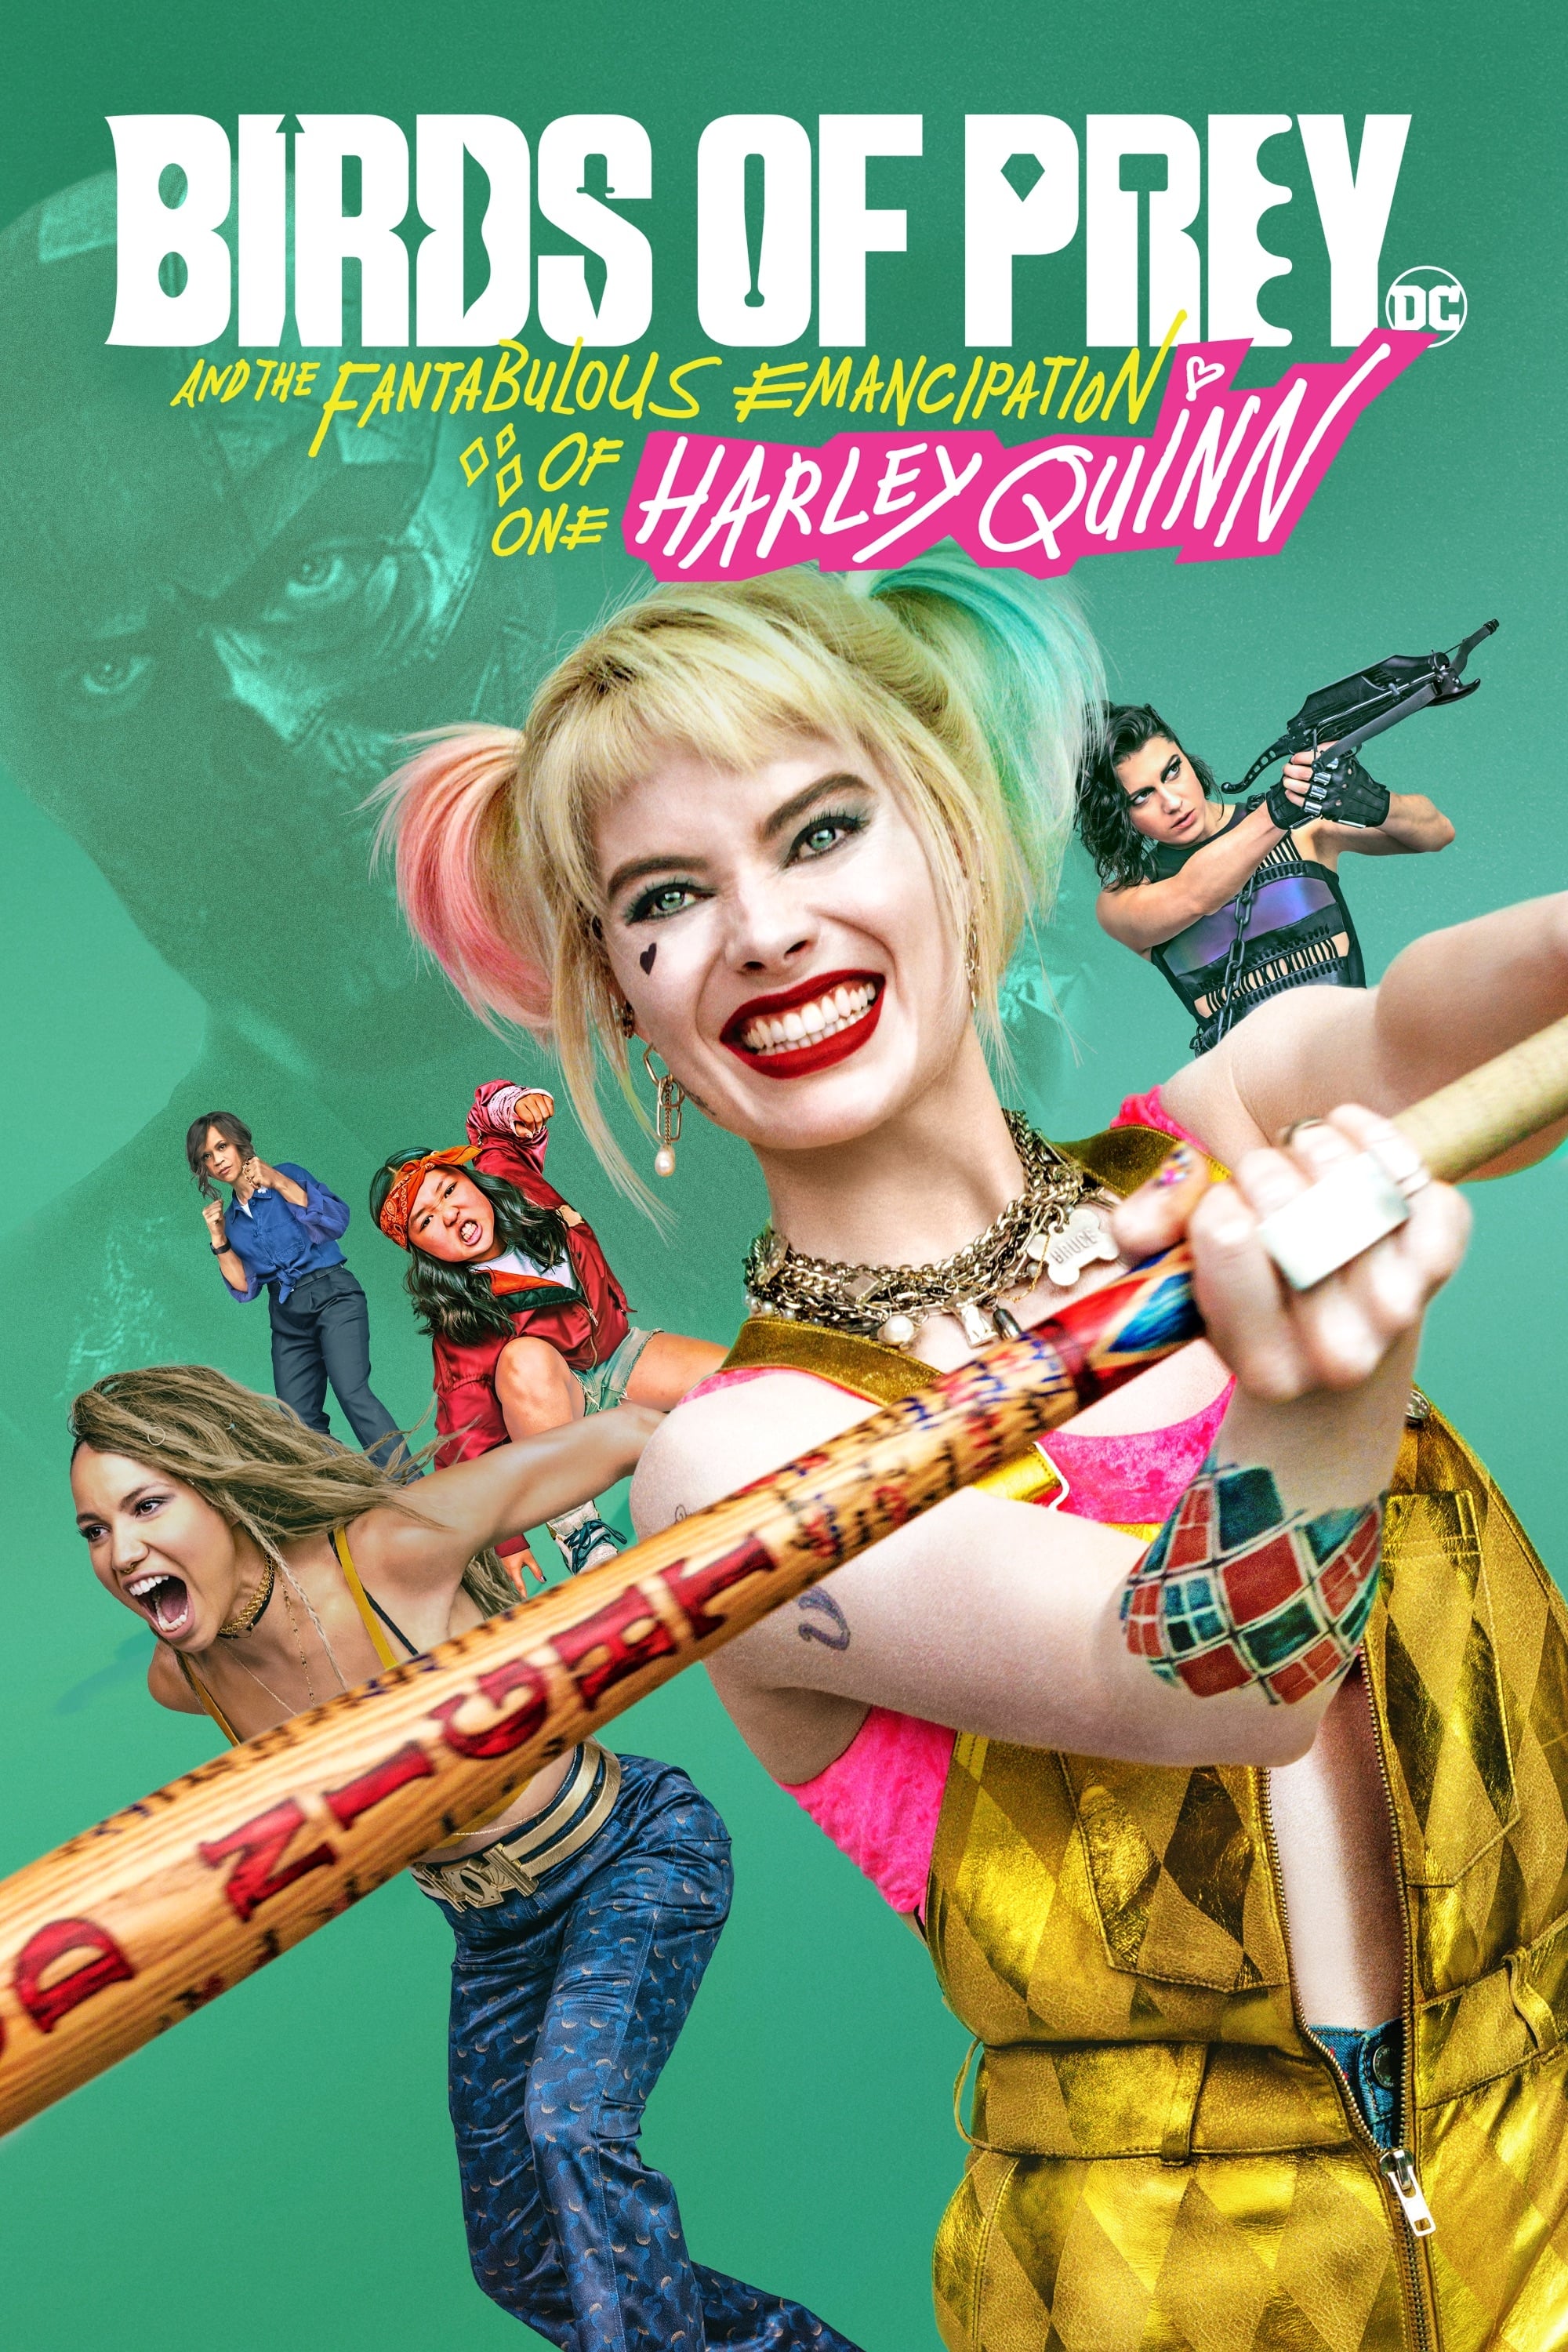 Birds of Prey And the Fantabulous Emancipation of One Harley Quinn (2020) REMUX 4K HDR Latino – CMHDD